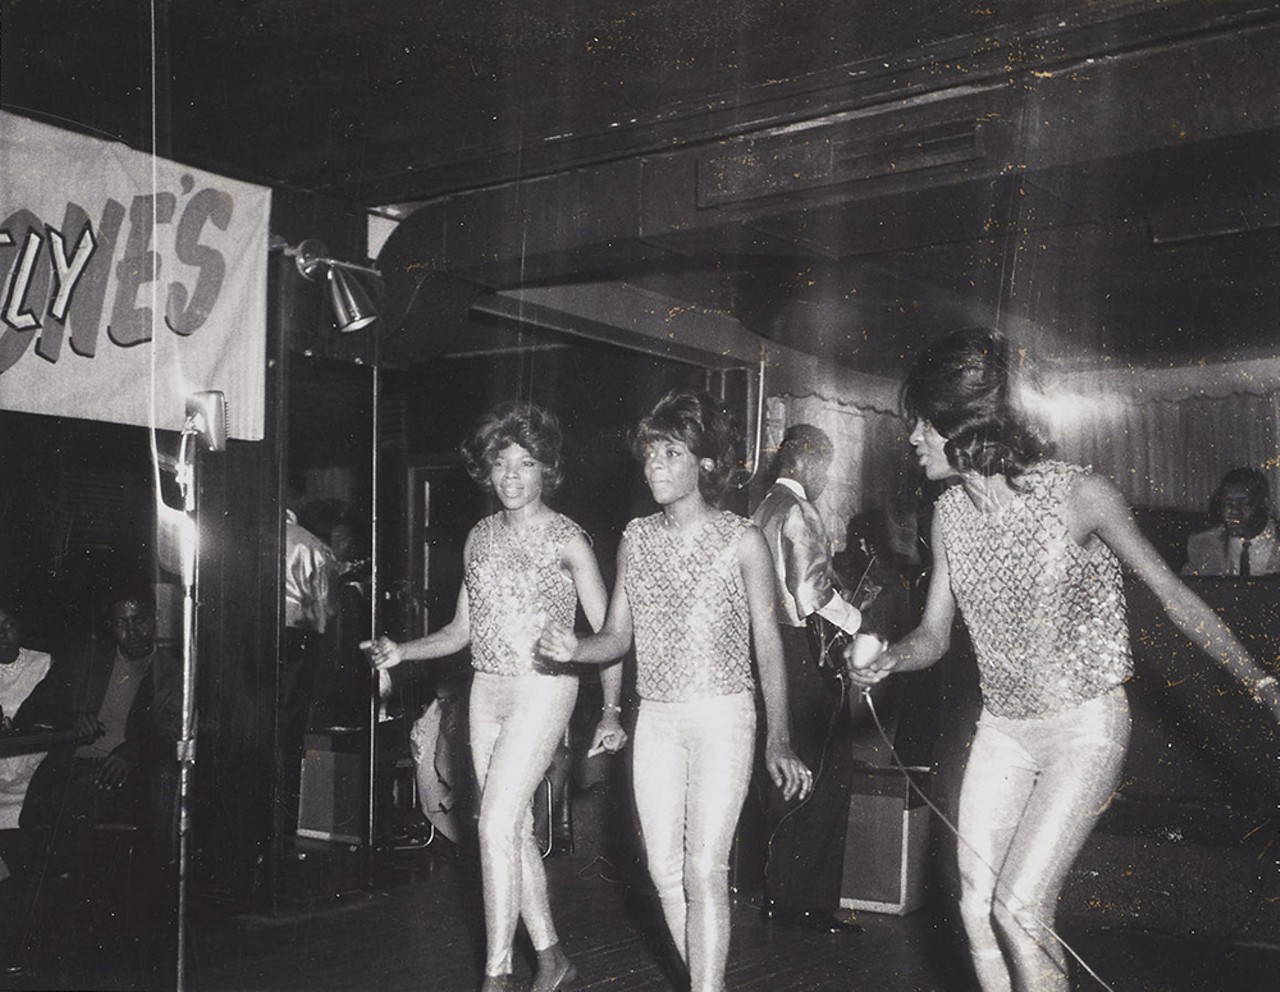 Martha and the Vandellas at the Music Box in Cleveland, undated. (Photo by Jimmy Baynes)